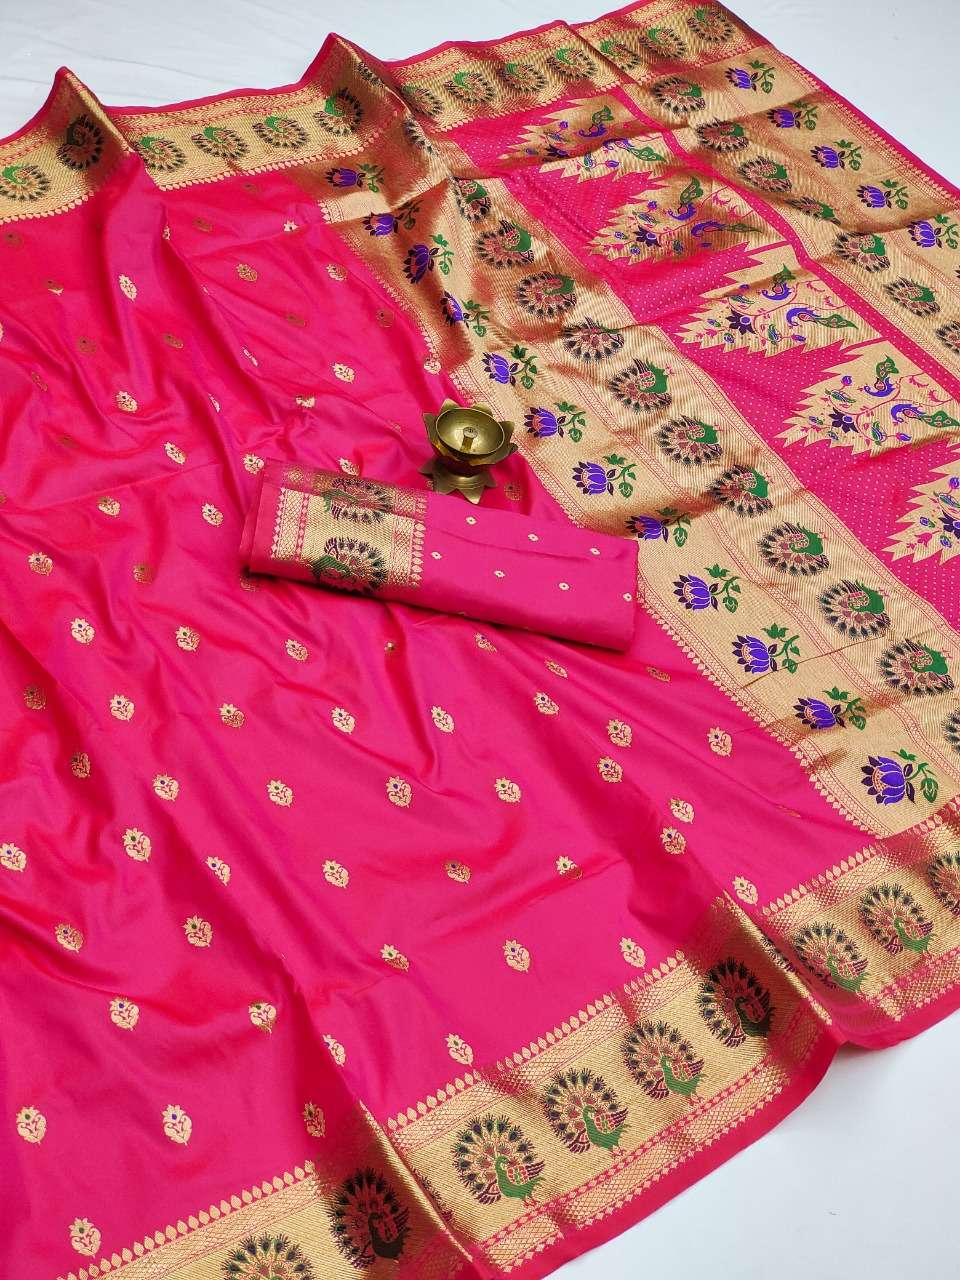 LATEST LAUNCH OF PAITHANI SILK WITH FINNEST WEAVING AND LOVE...